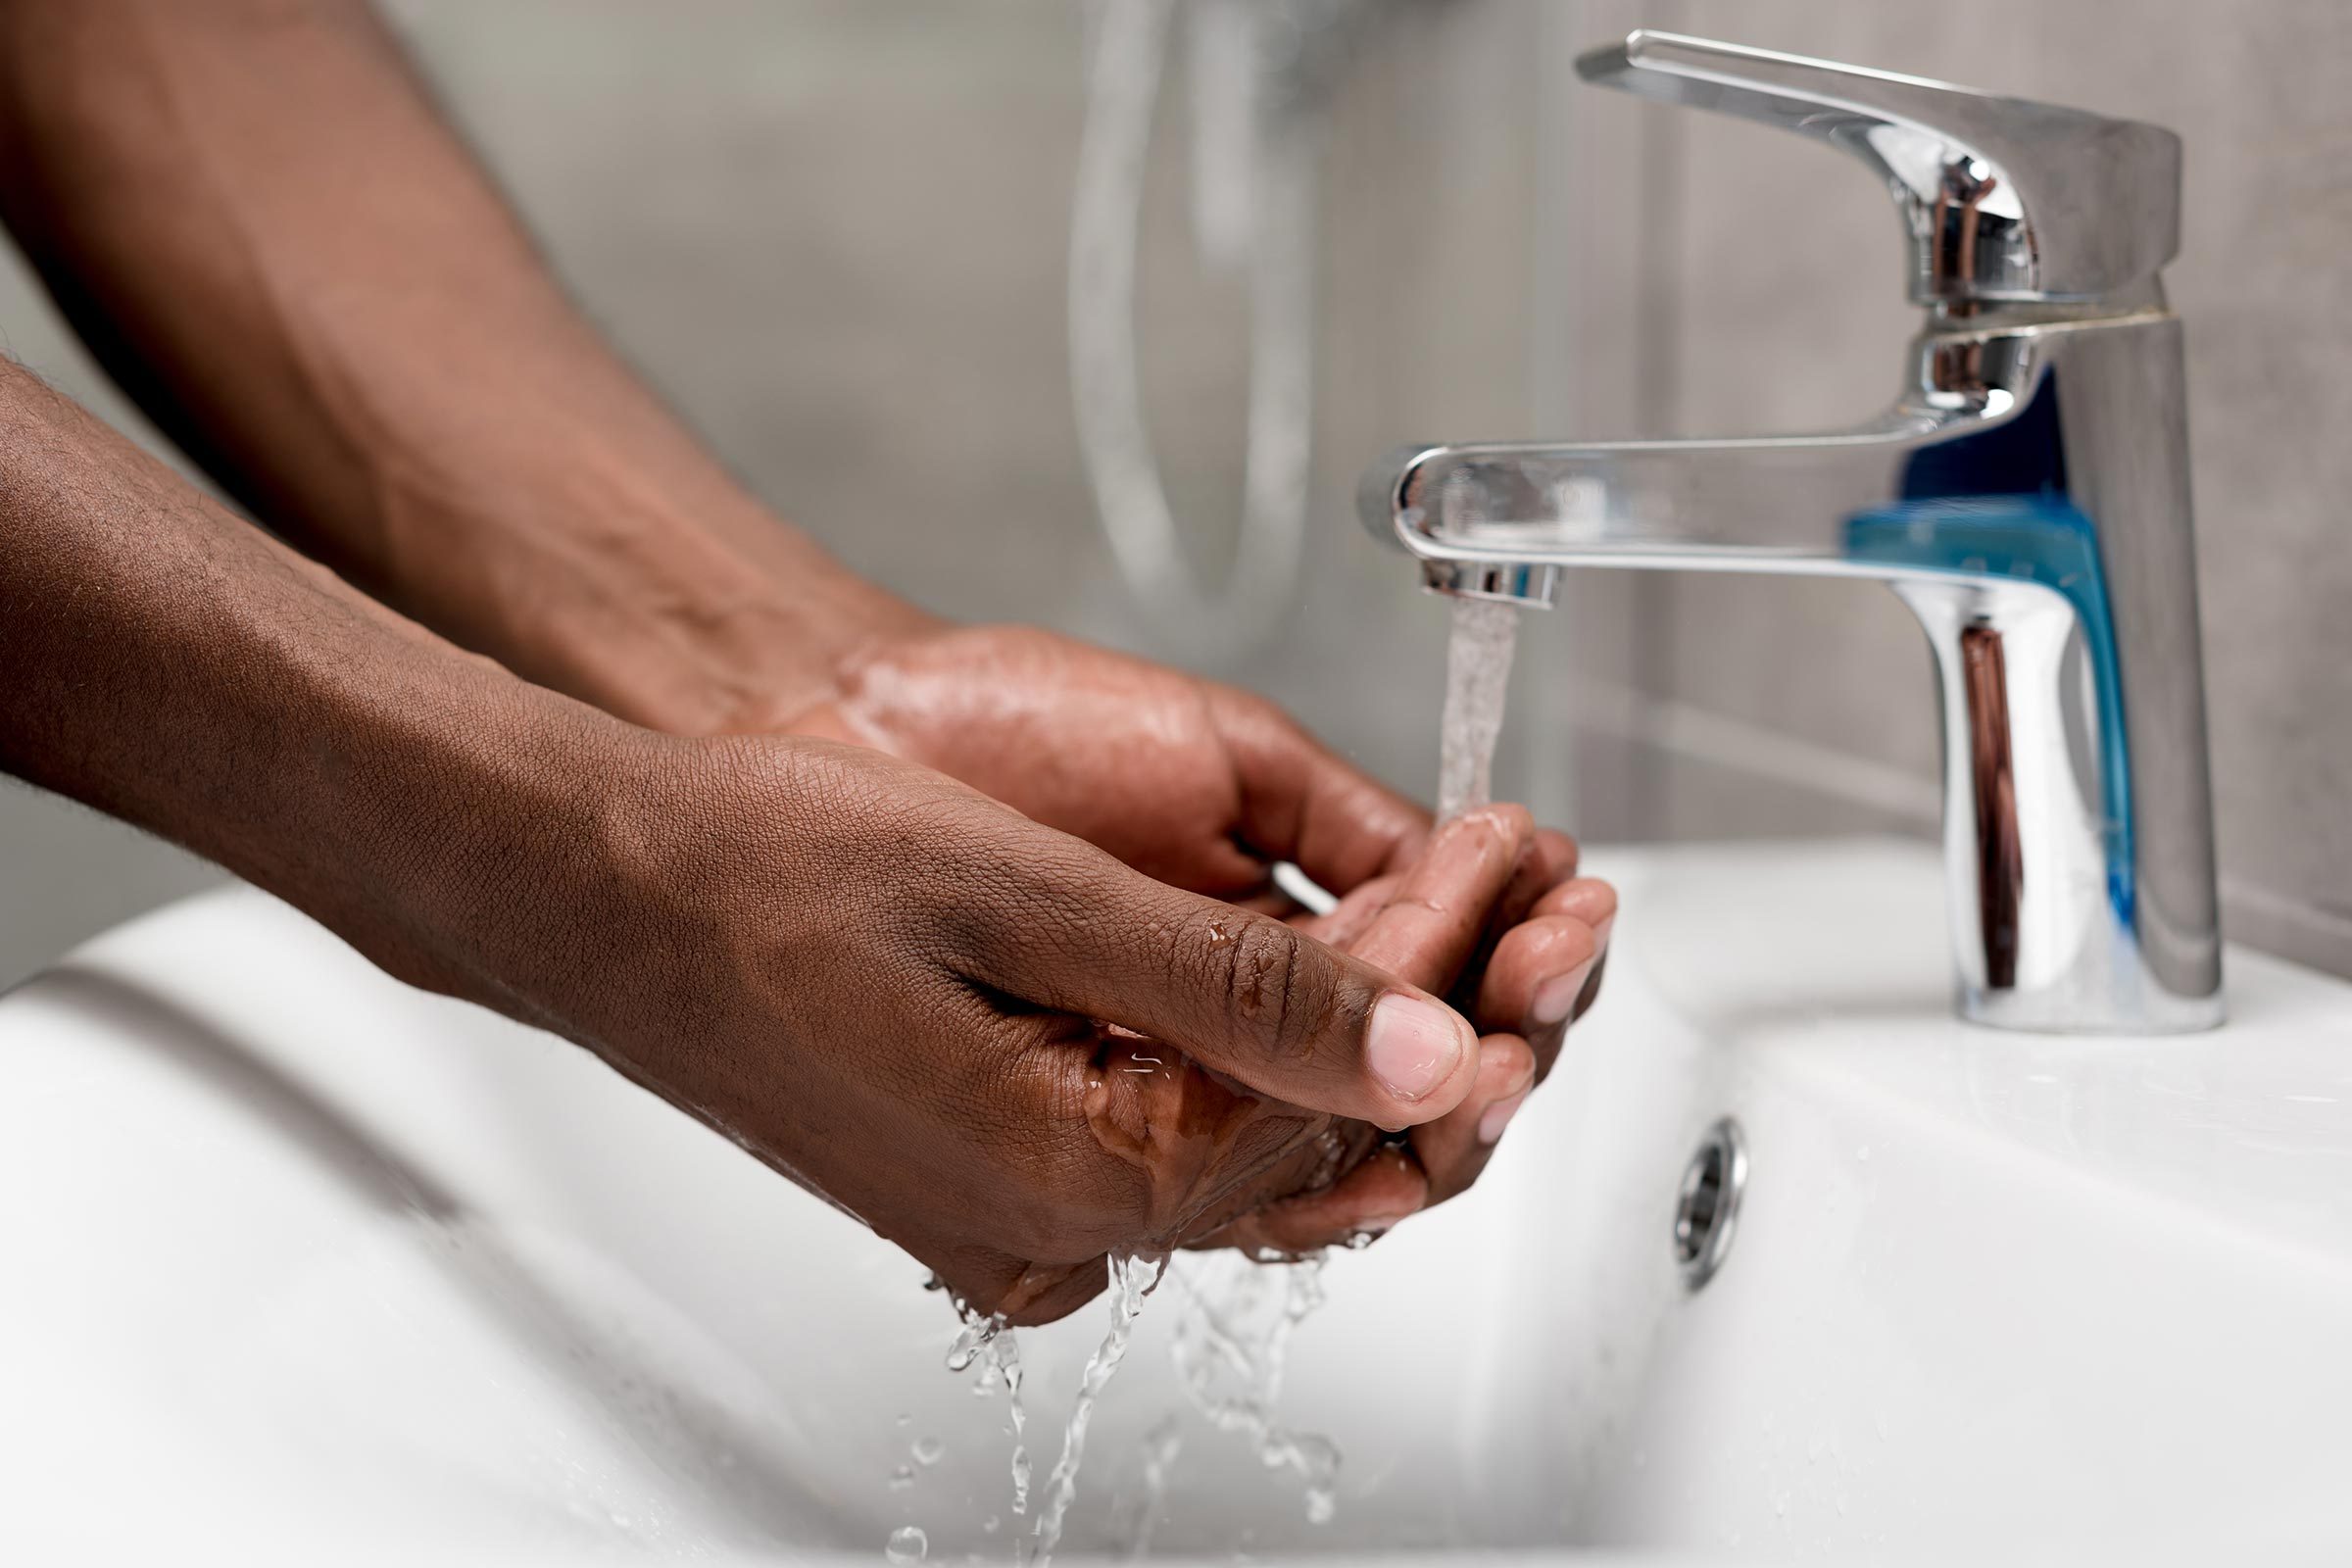 Health specialist: Why you should wash your hands